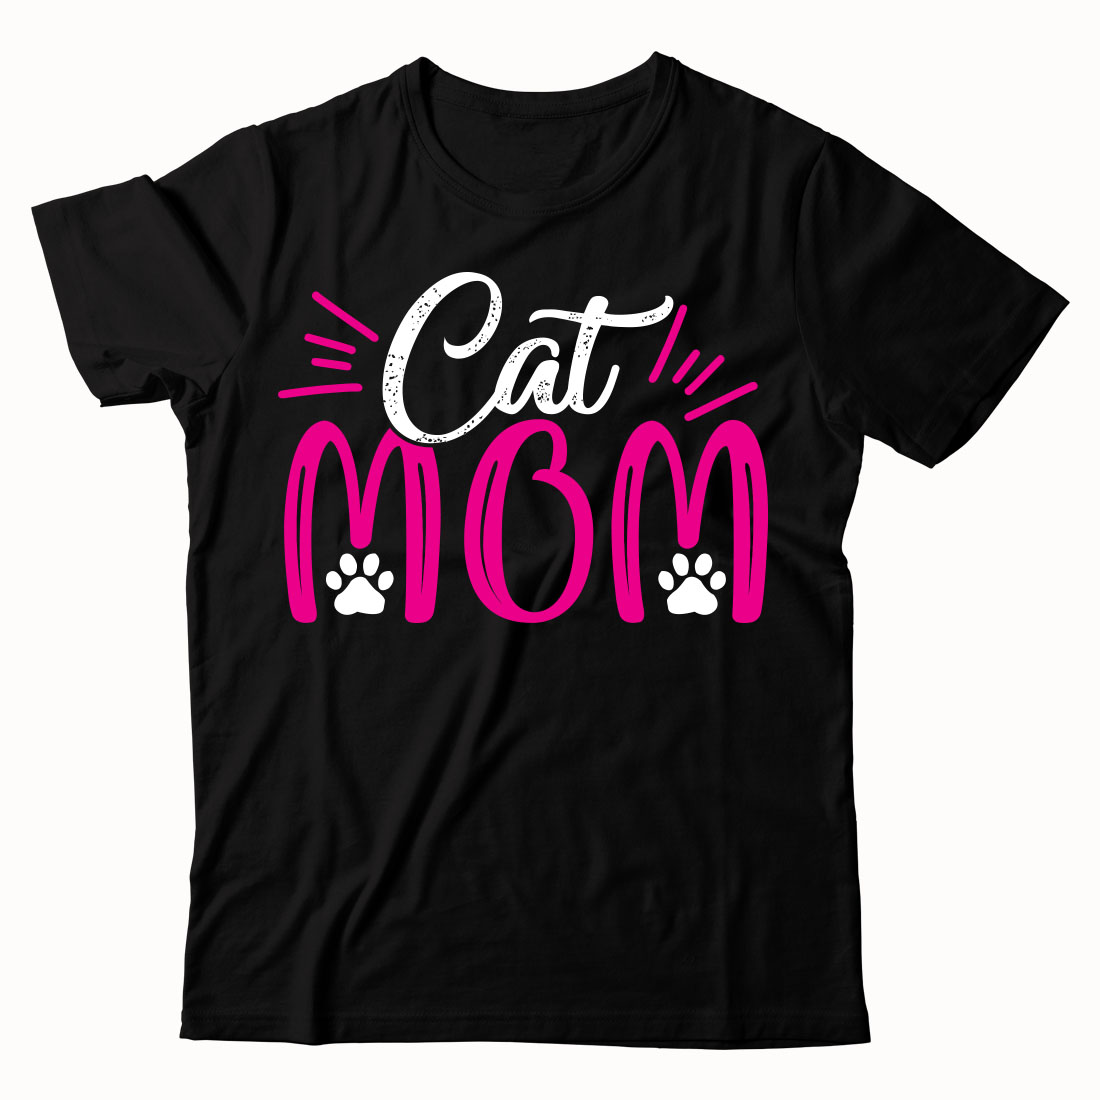 Black cat mom t - shirt with pink lettering.